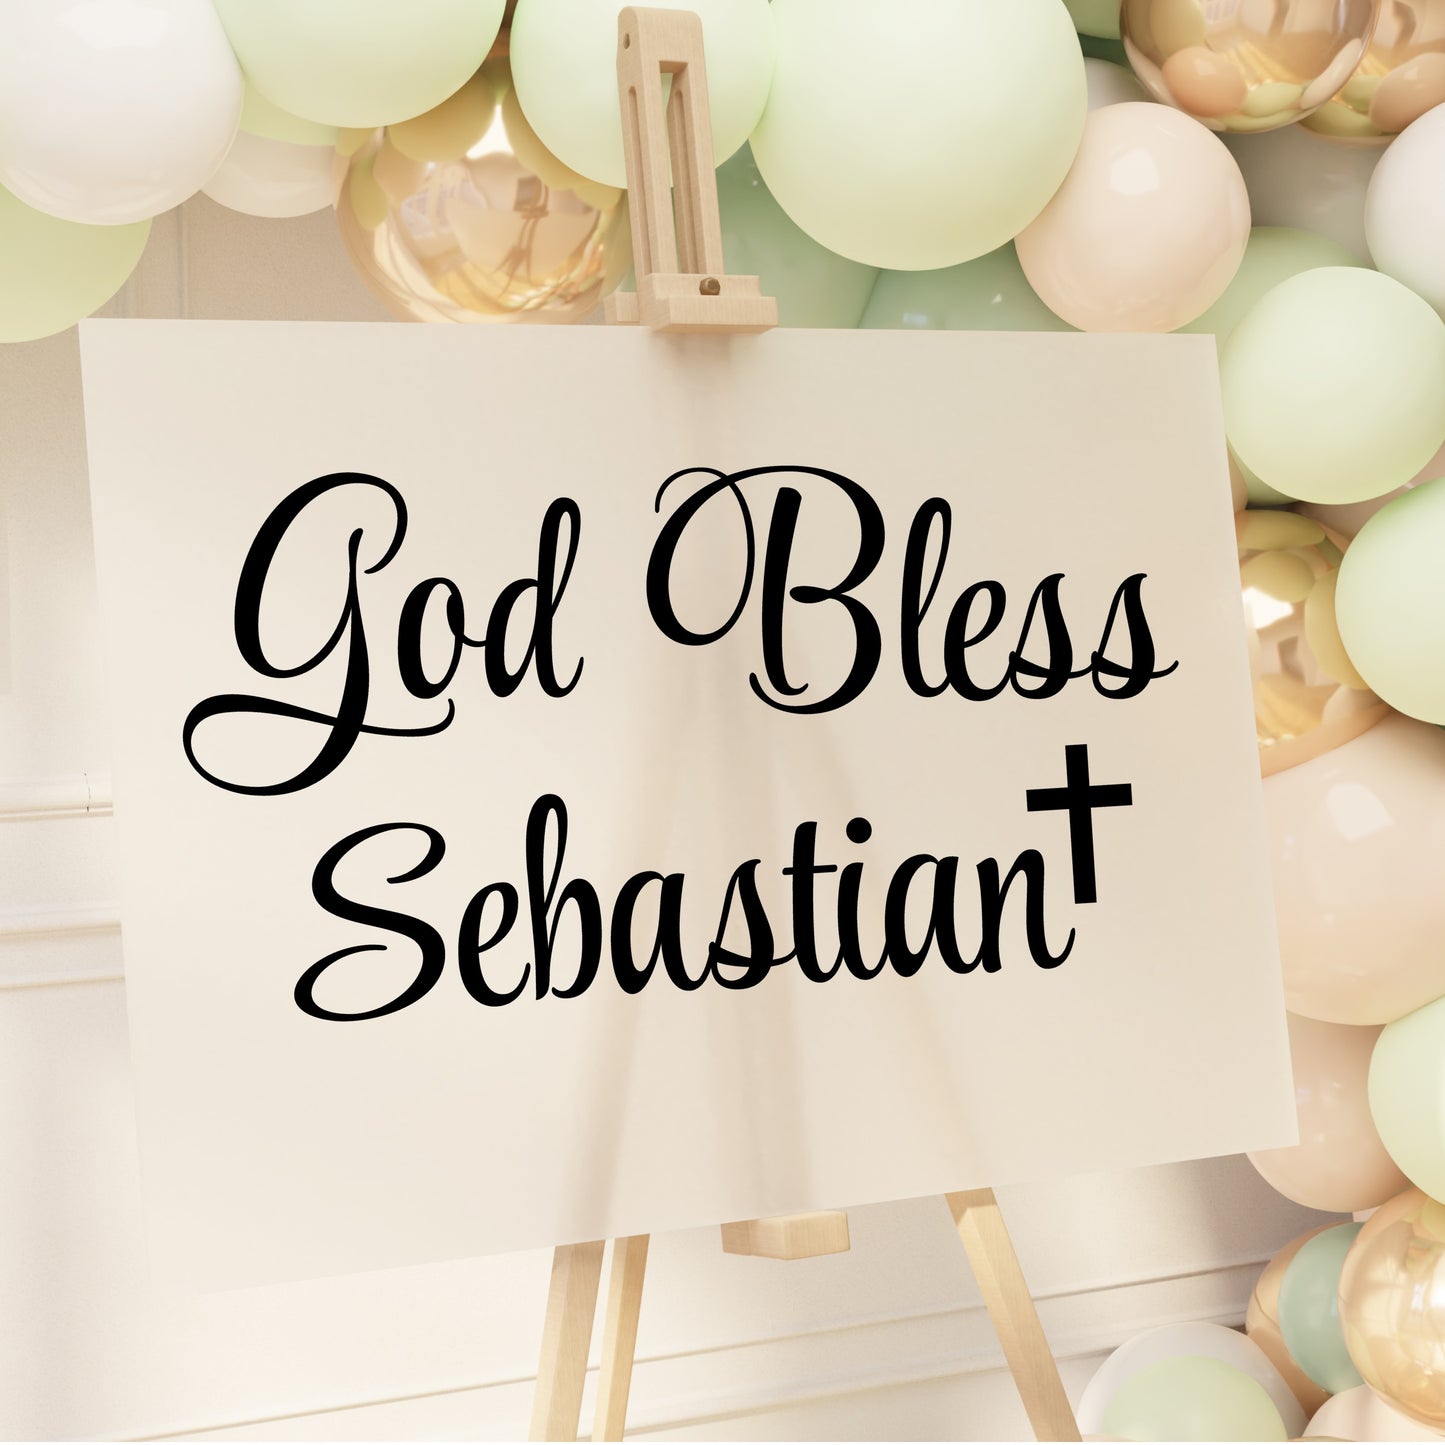 Personalized "God Bless" Vinyl Decal for Party Backdrops